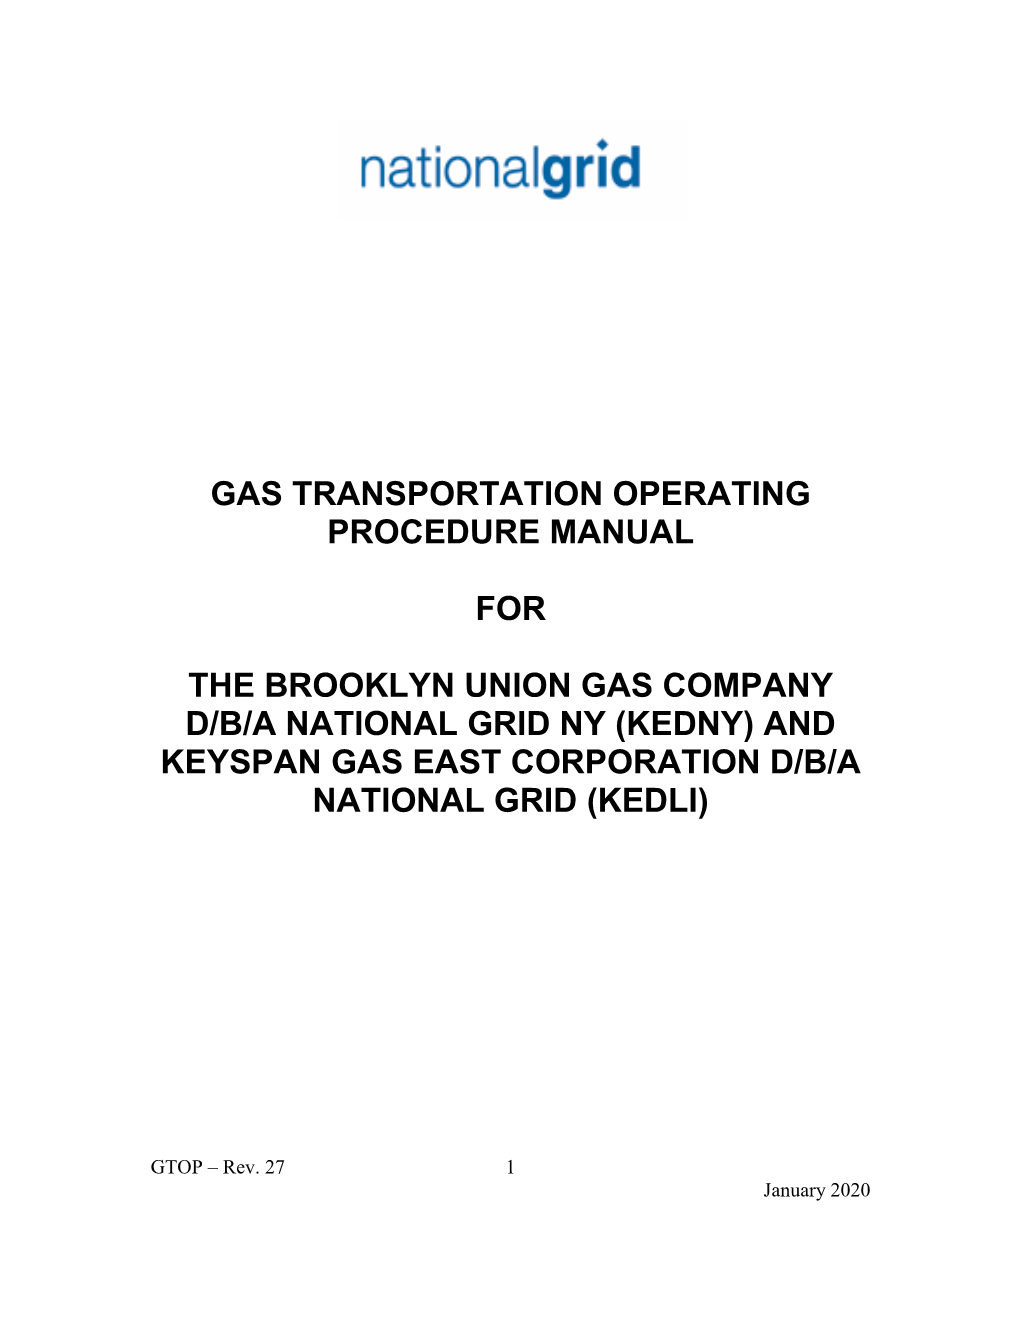 Gas Transportation Operating Procedure Manual for the Brooklyn Union Gas Company D/B/A National Grid Ny (Kedny) and Keyspan